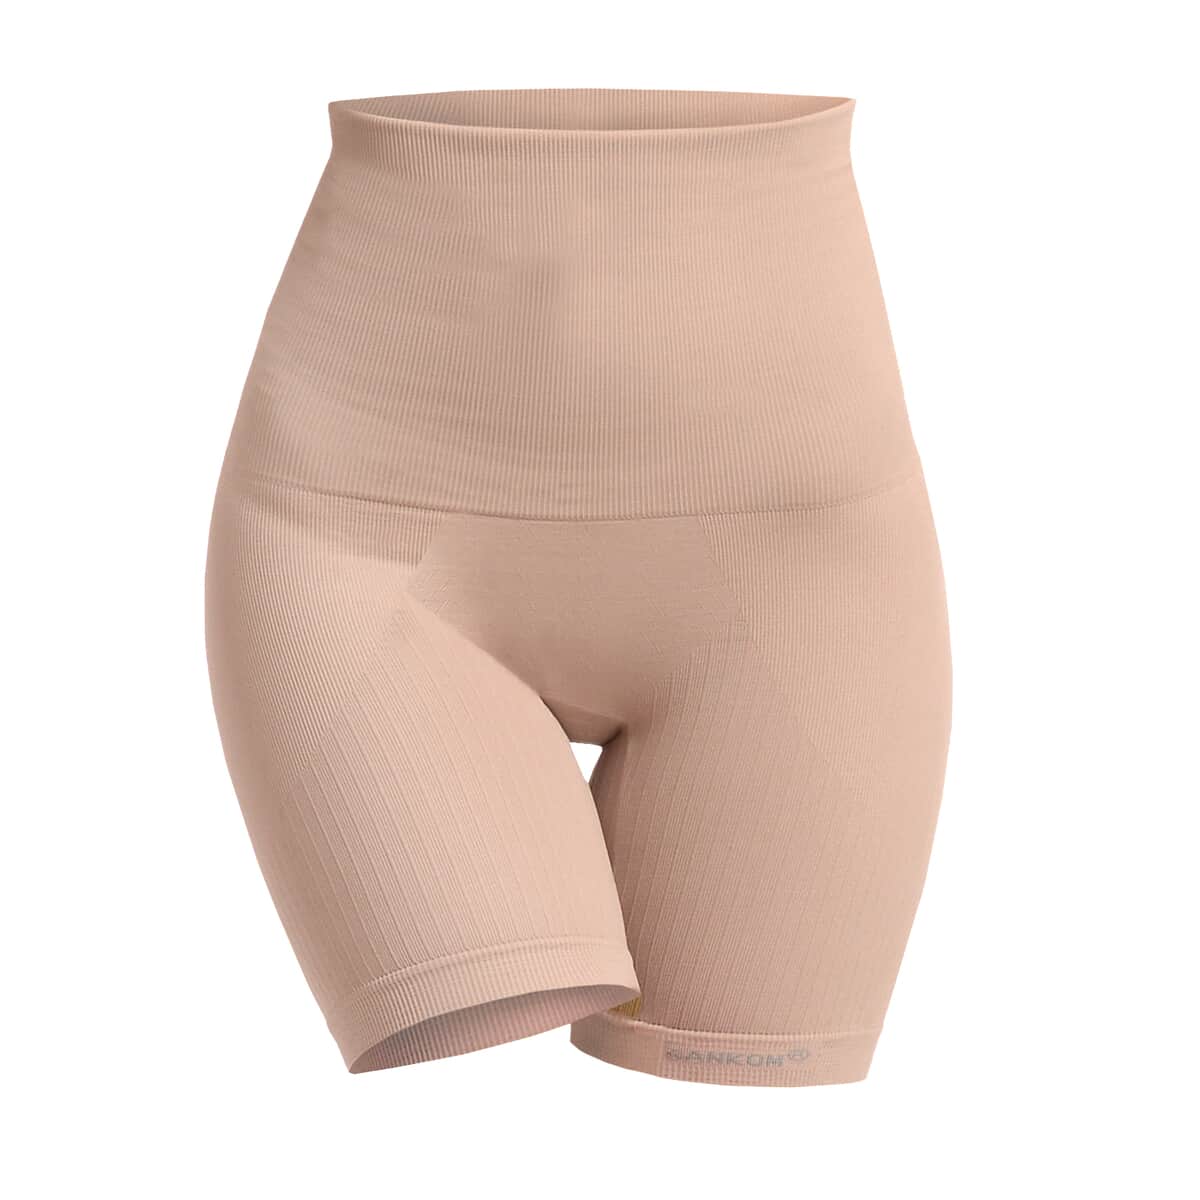 Sankom Patent Mid-Thigh Shaper Shorts with Cooling Fibers - S/M | Beige image number 1